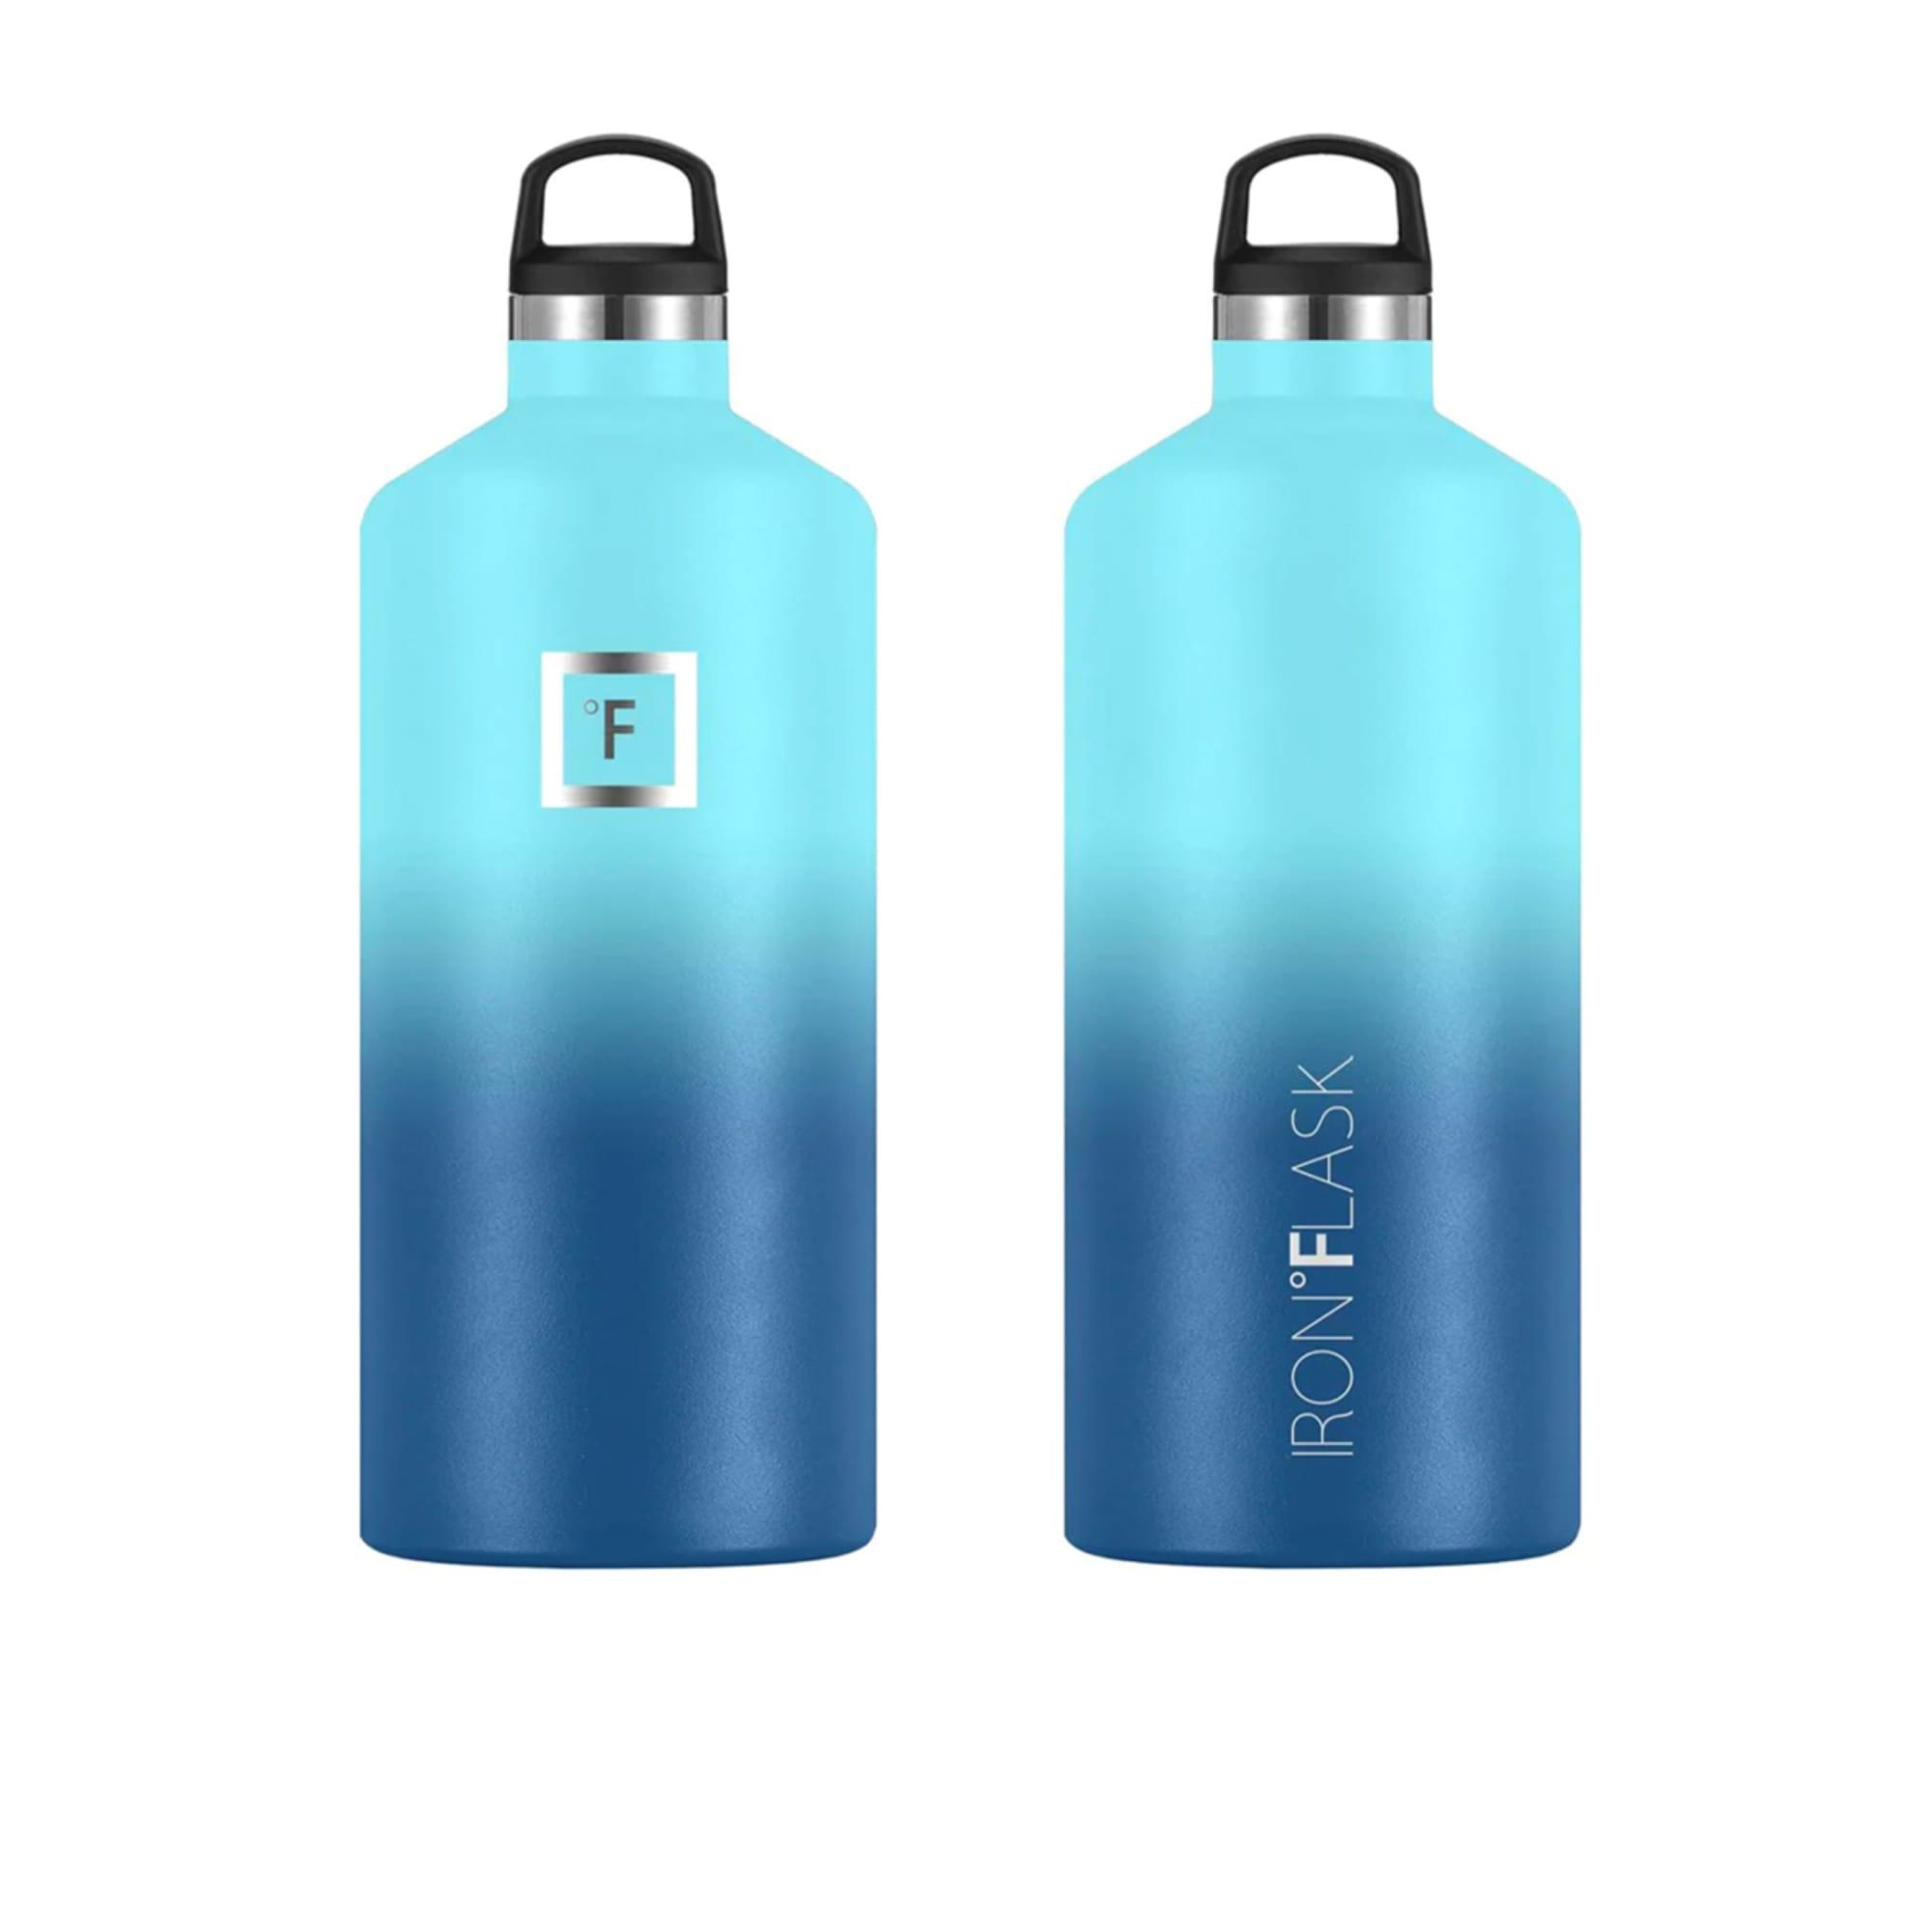 Iron Flask Narrow Mouth Bottle with Spout Lid 1.9L Blue Waves Image 4